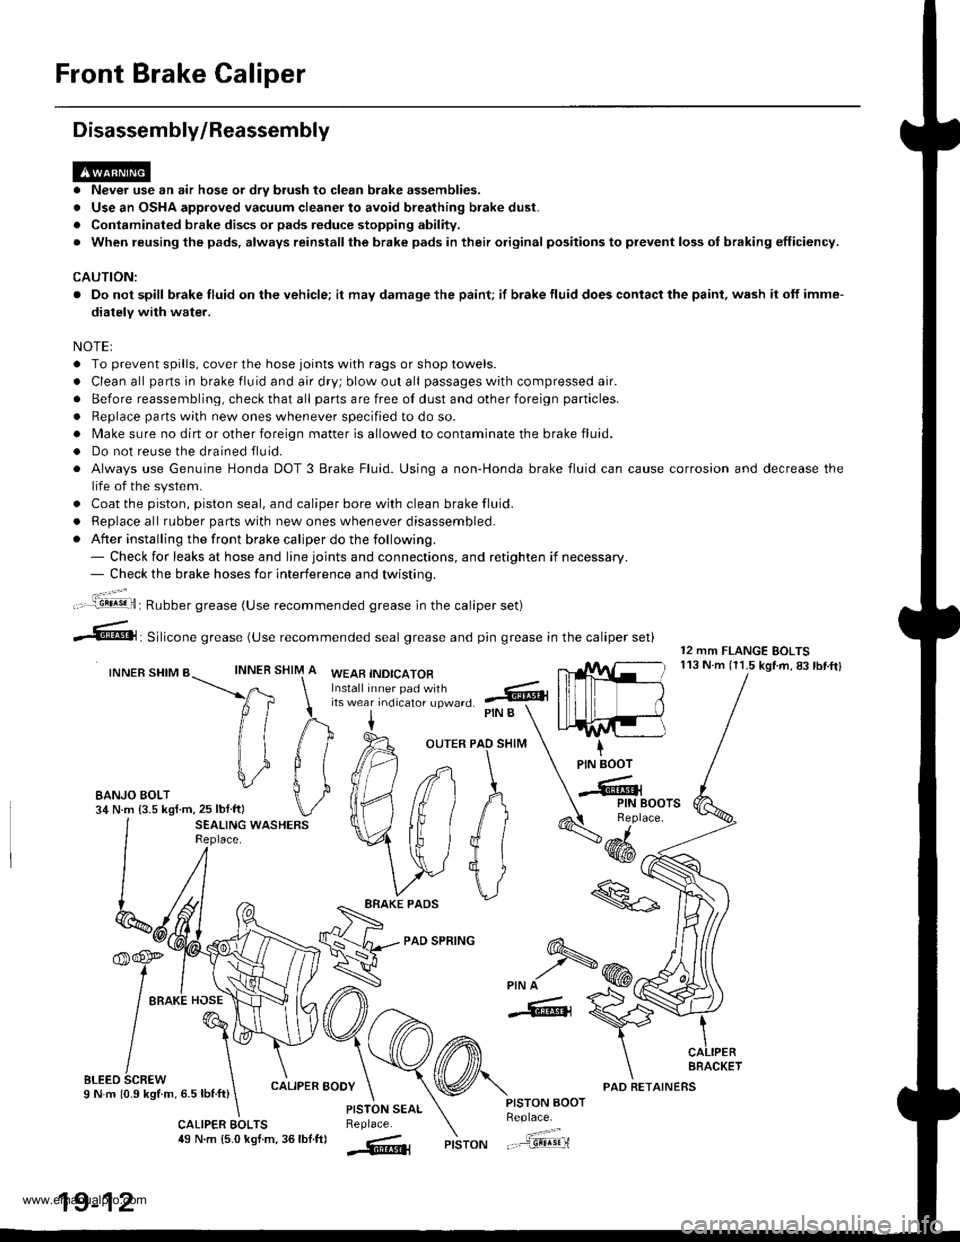 HONDA CR-V 1997 RD1-RD3 / 1.G User Guide 
Front Brake Caliper
Disassembly/Reassembly
. Never use an air hose or dry brush to clean brake assemblies.
. Use an OSHA approved vacuum cleaner to avoid breathing brake dust.
. Contaminated brake di